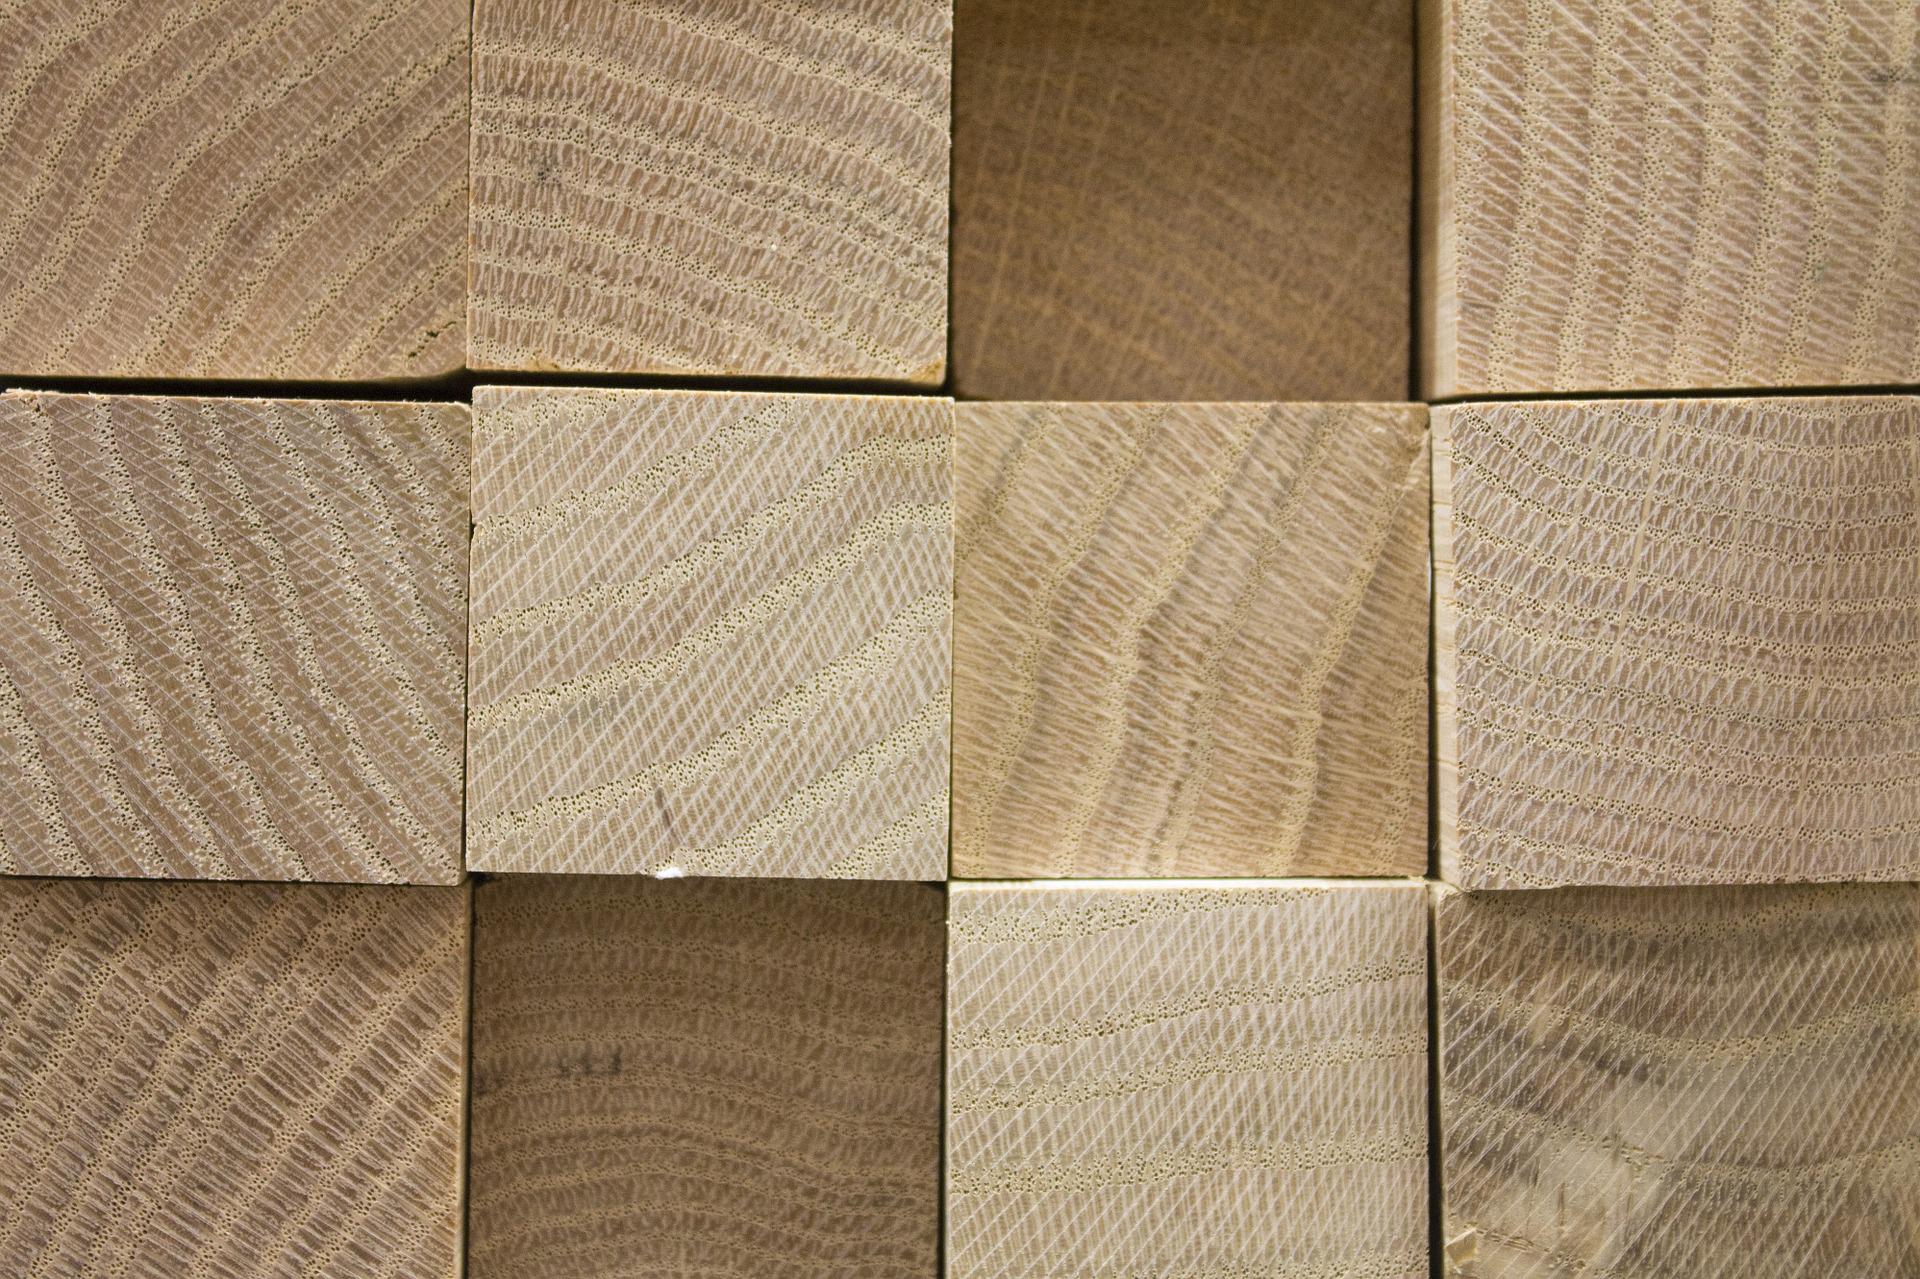 a picture of blocks of wood arranged in a neat pile, showing the square ends of the different pieces of wood